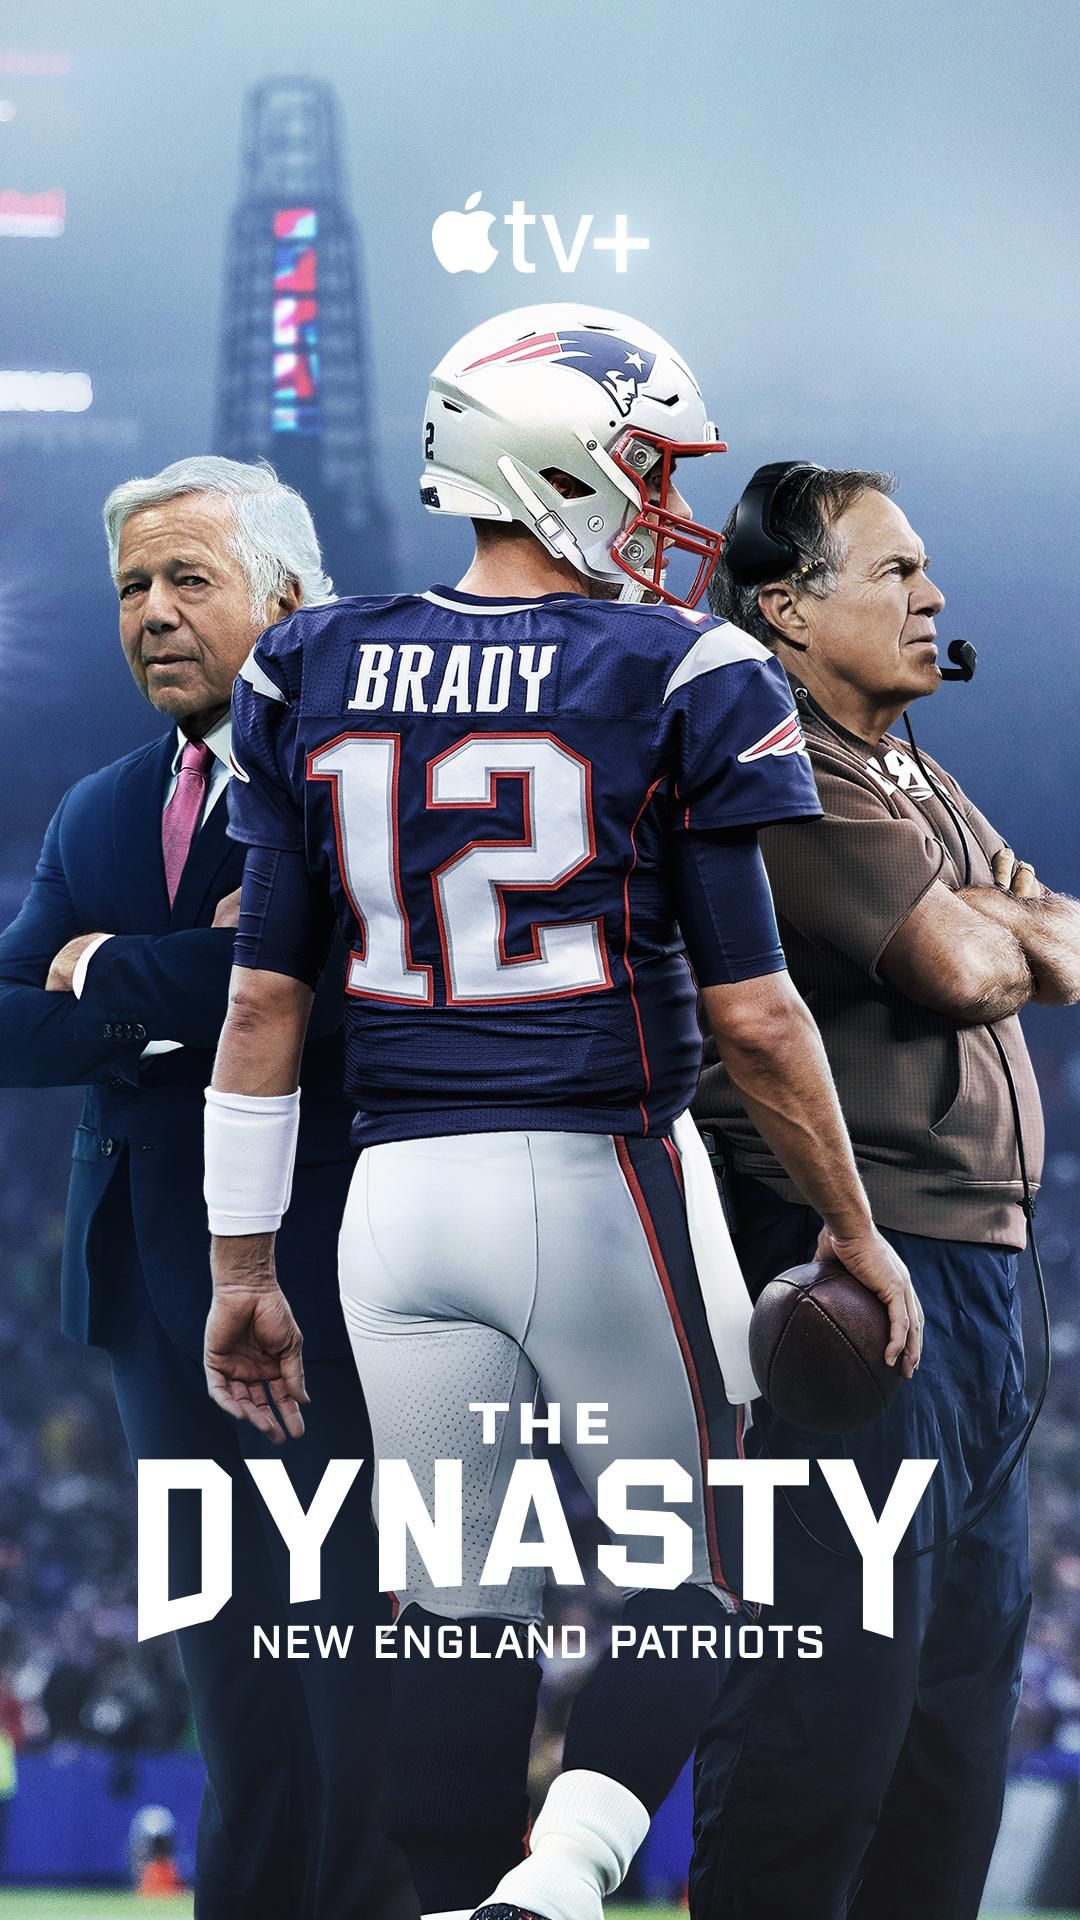 The Dynasty - New England Patriots poster